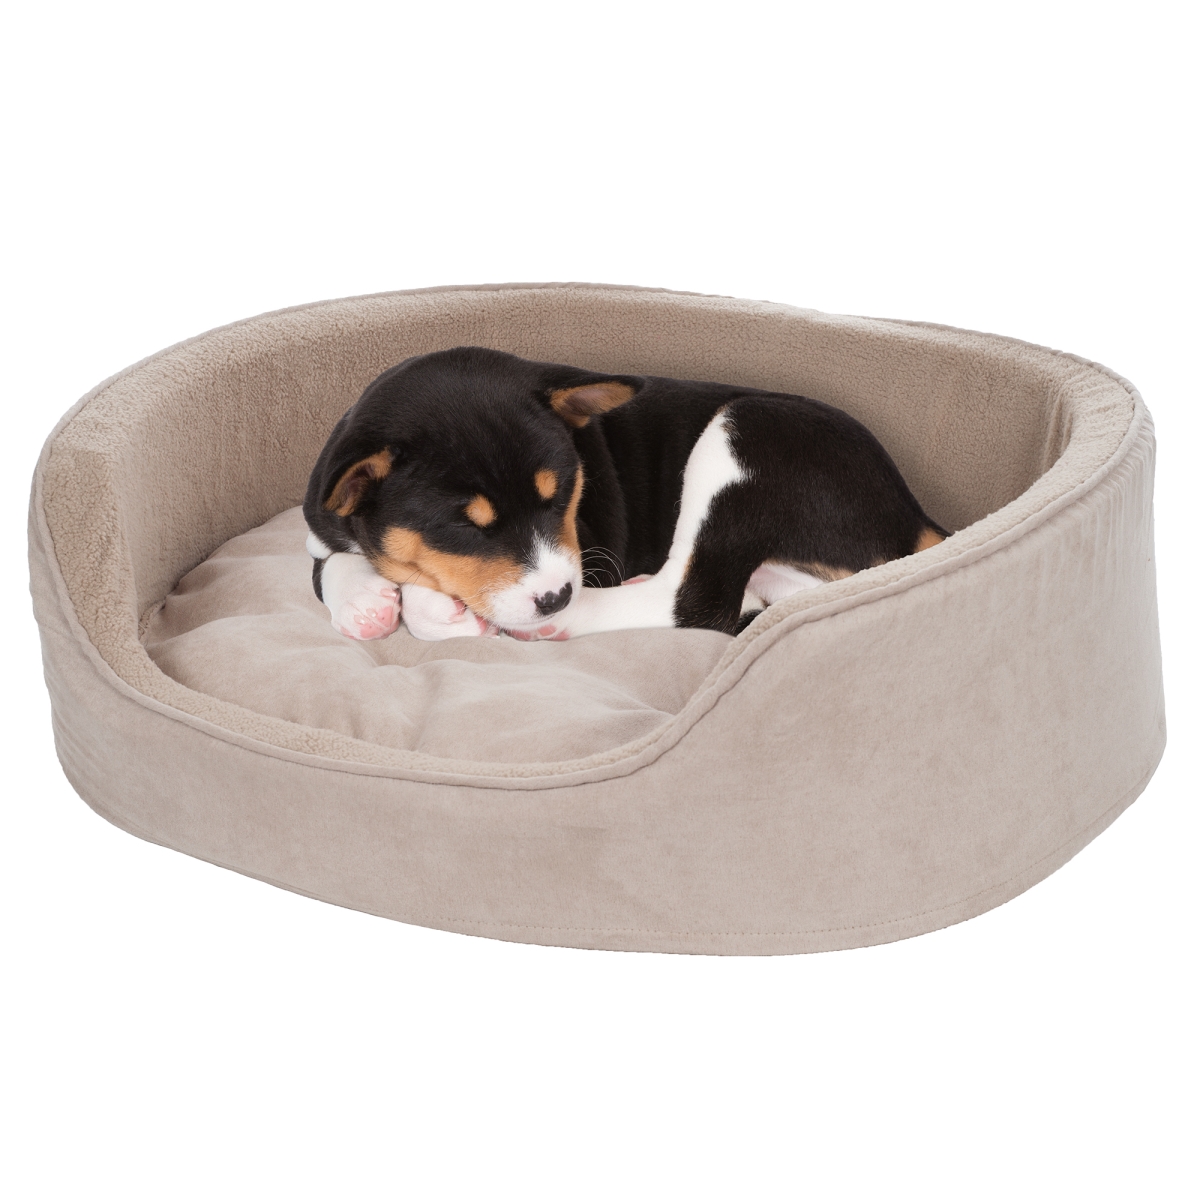 Petmaker 80-pet5001 Large Cuddle Round Microsuede Pet Bed - Clay